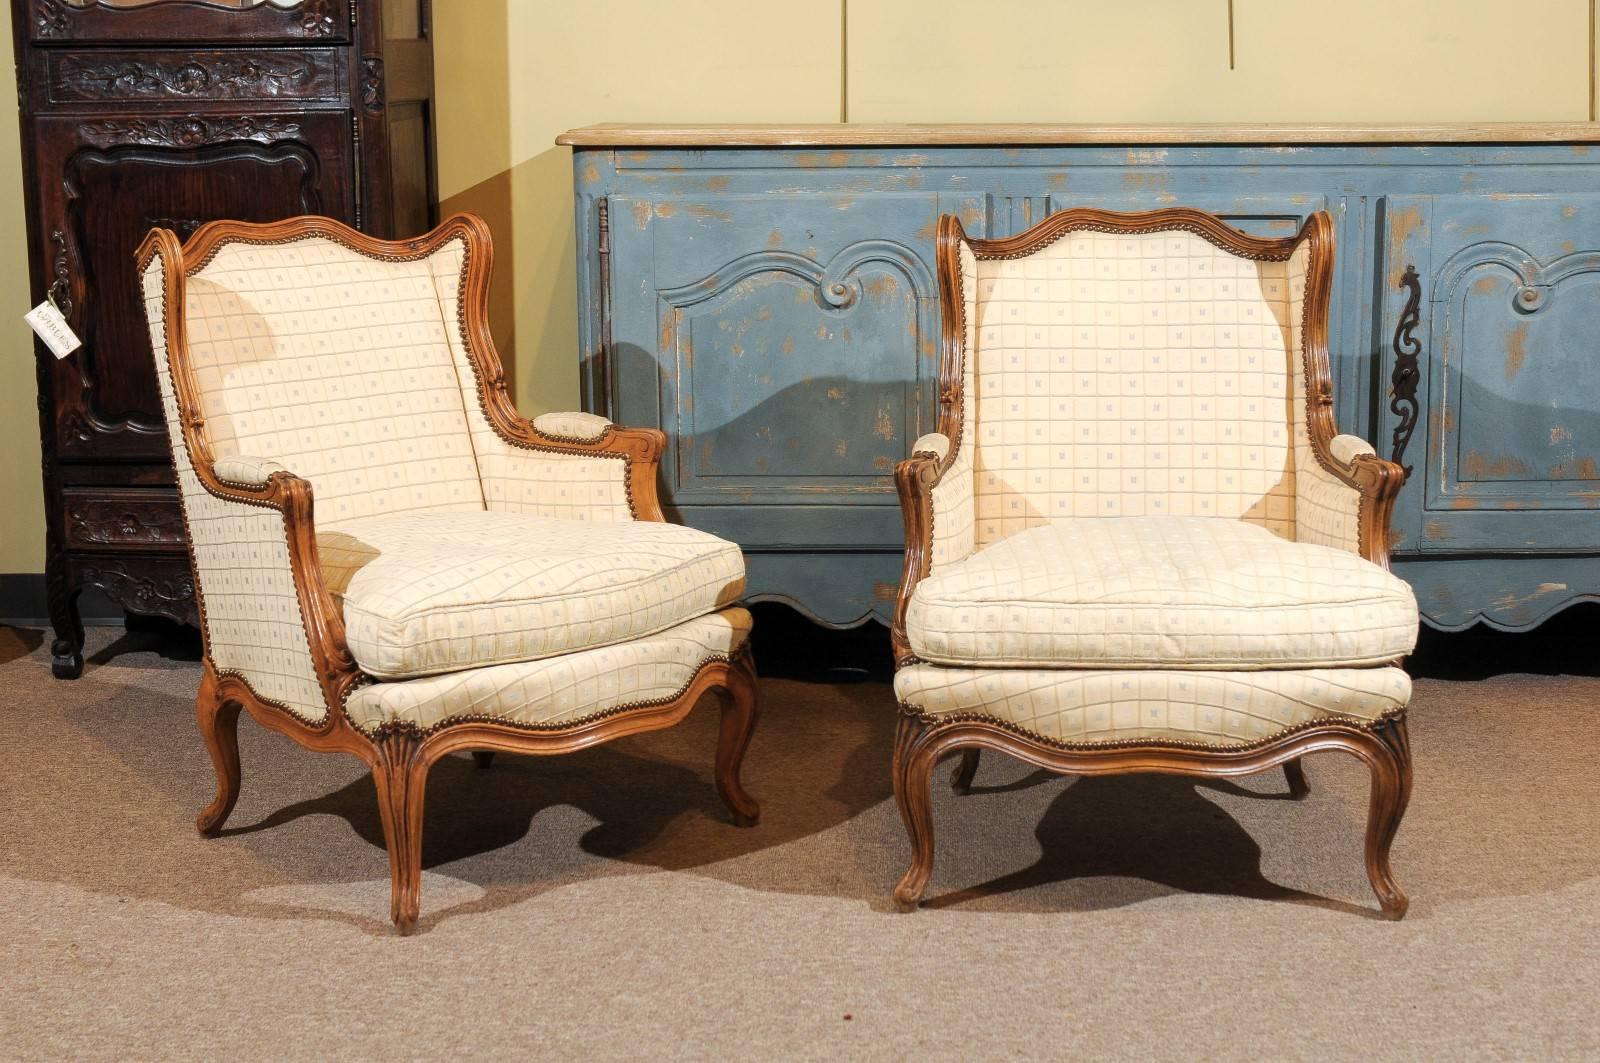 Pair of 19th Century Walnut  Louis XV Style Bergeres, circa 1880
This is a very charming pair of antique beregere chairs in a wonderful walnut frame. The design is very fluid and the size is petite. The chairs are nice and comfortable. They would